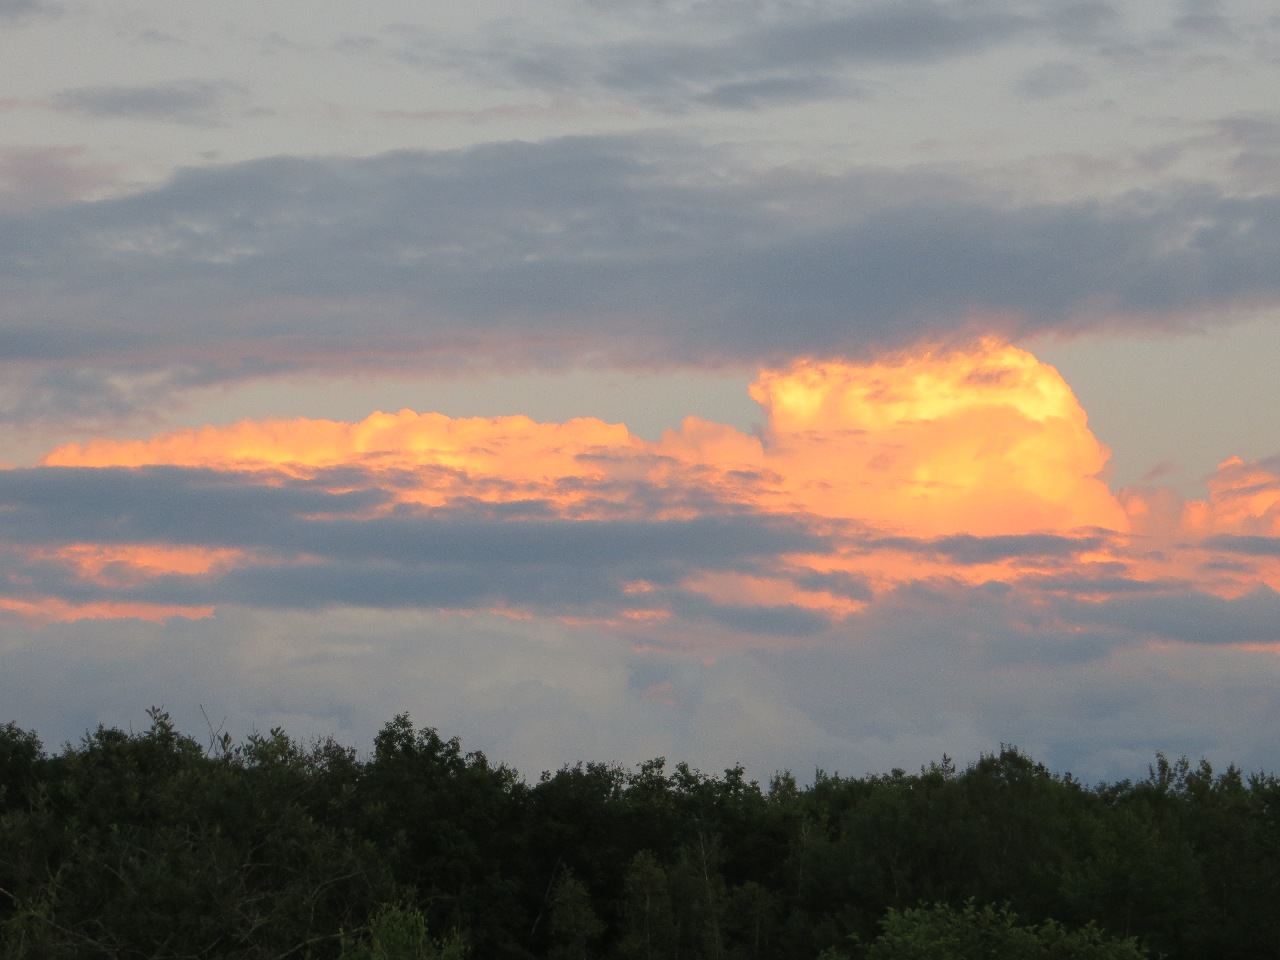 The eastern sky over a dark treeline: tall clouds reach up to catch the last rays of the just-set western sun, glowing orange behind the smudgy gray-blue bands of the lower clouds which are already in shadow.